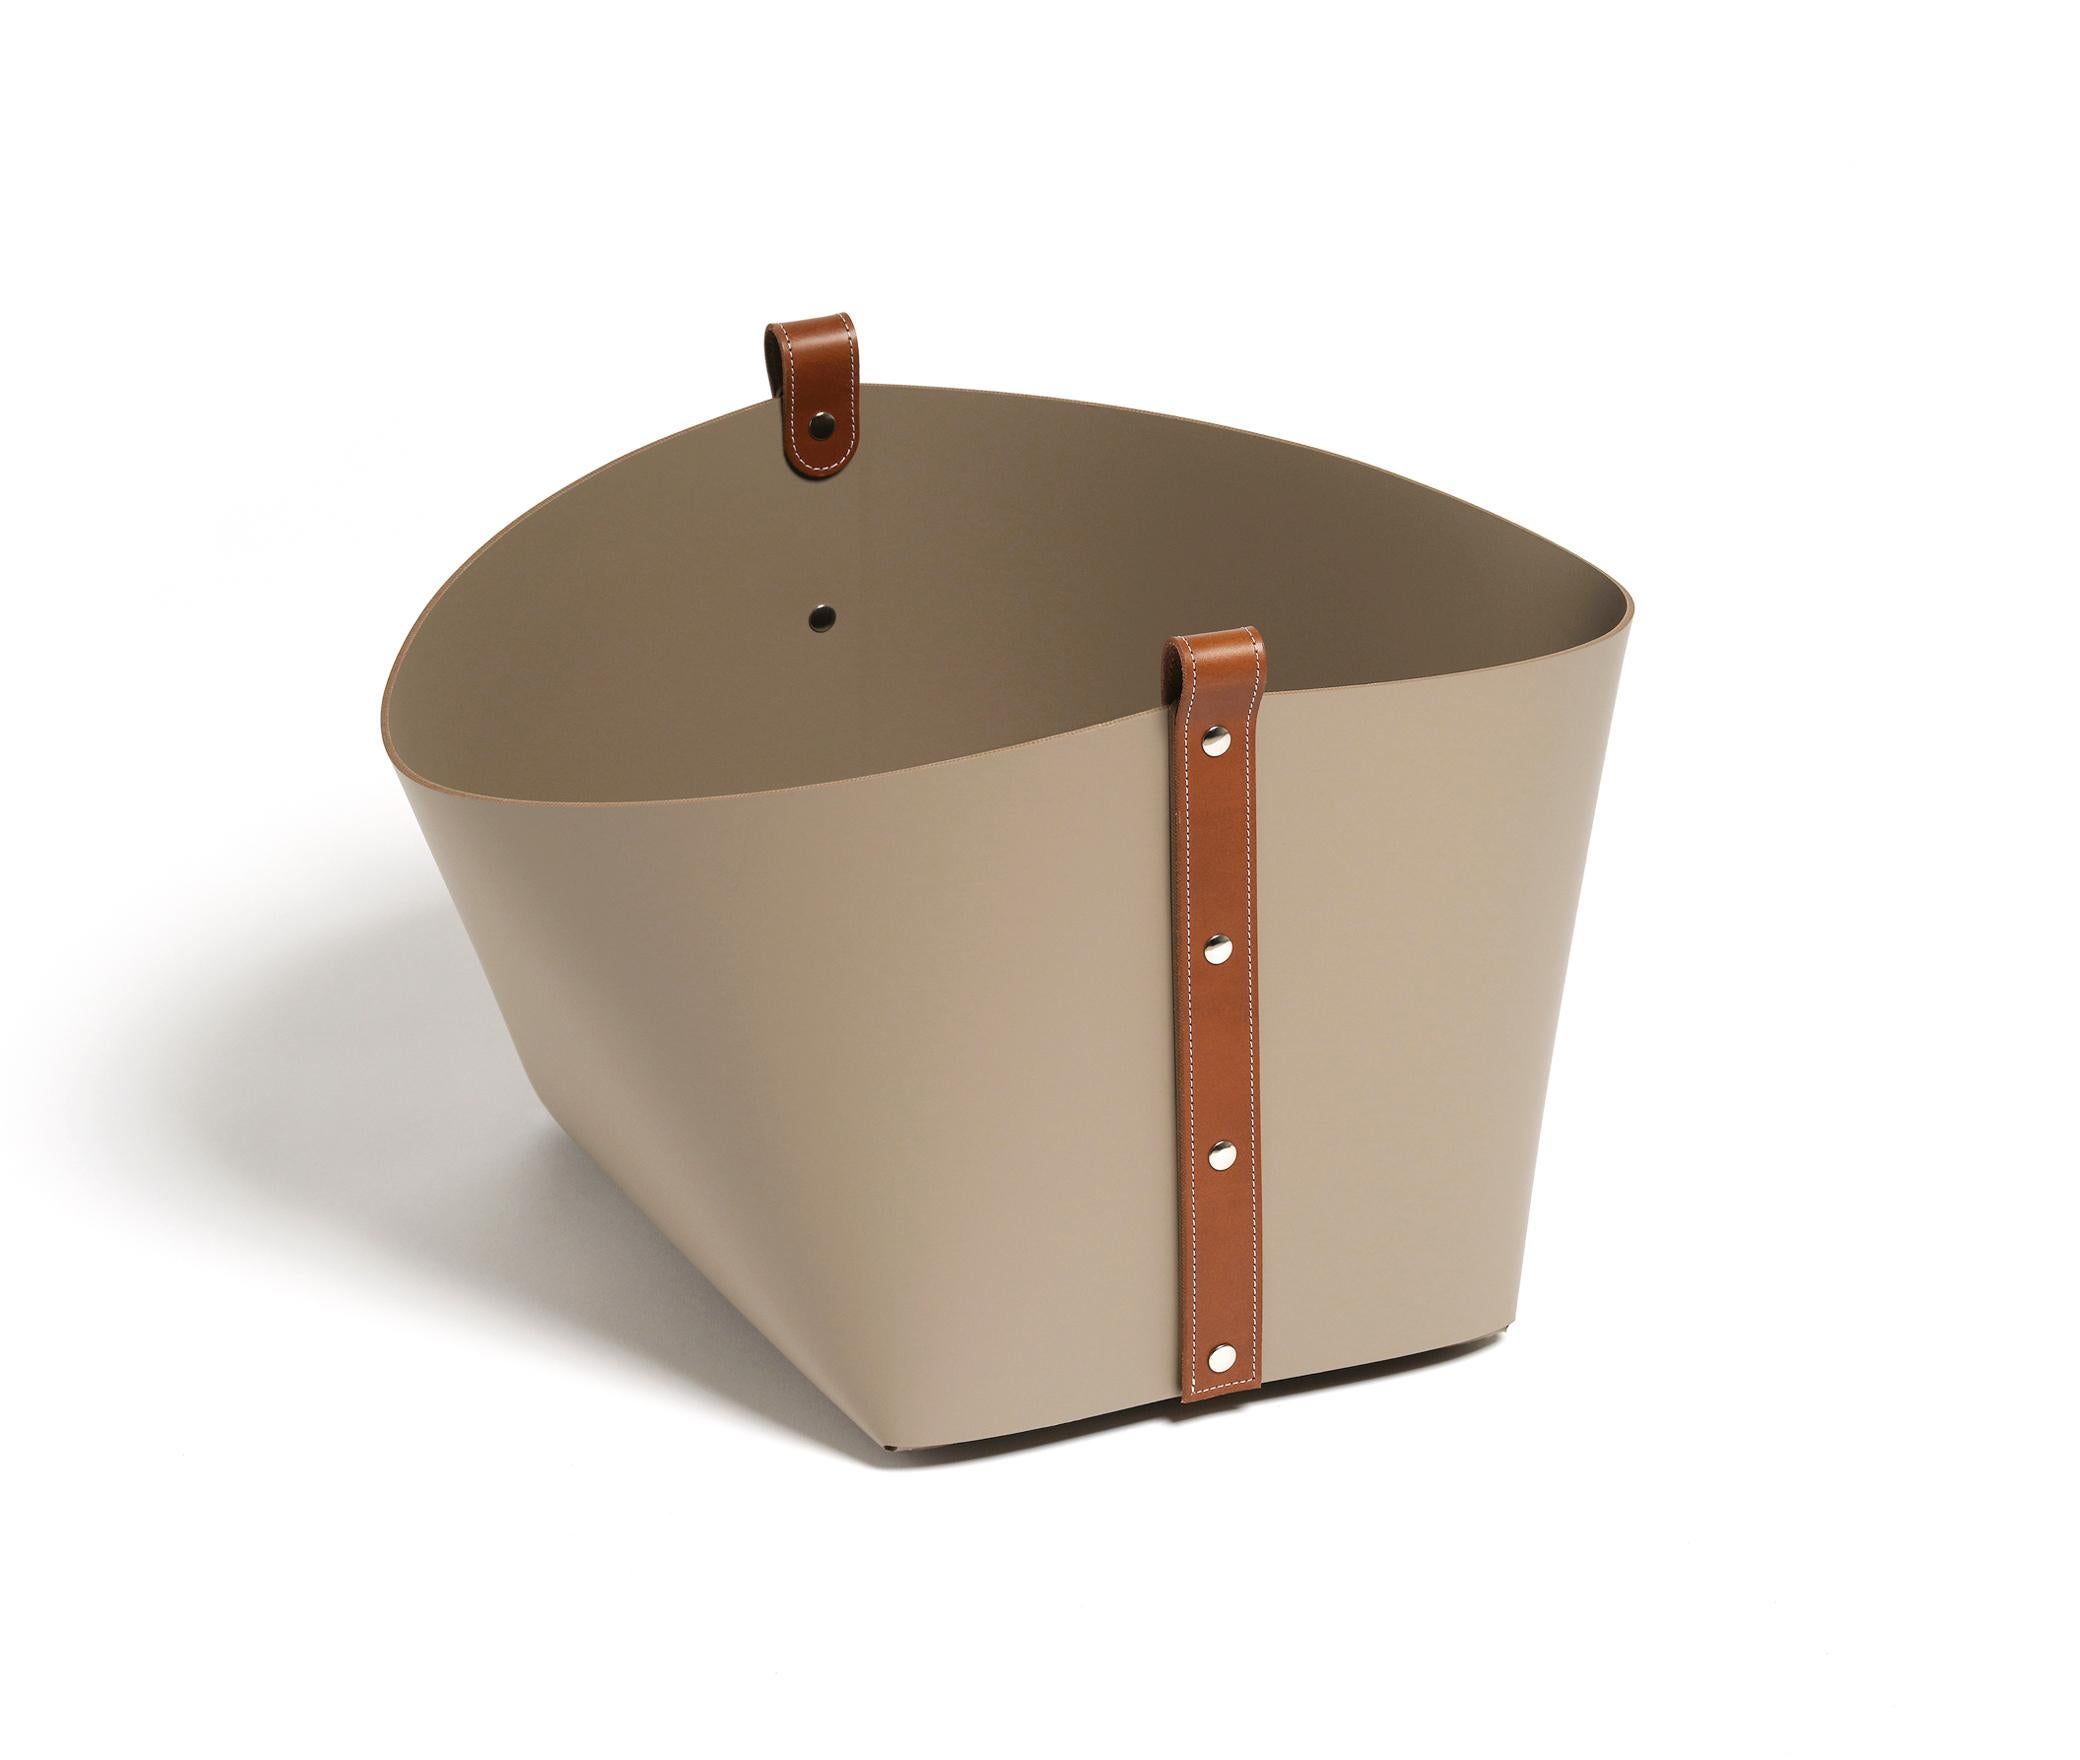 Ovo basket: Compact yet capacious.

Fashioned of resistant recycled leather, with tan or black this basket boasts an unstructured silhouette with flared sides supported by a sturdy rectangular base that can hold a large number of items. It might